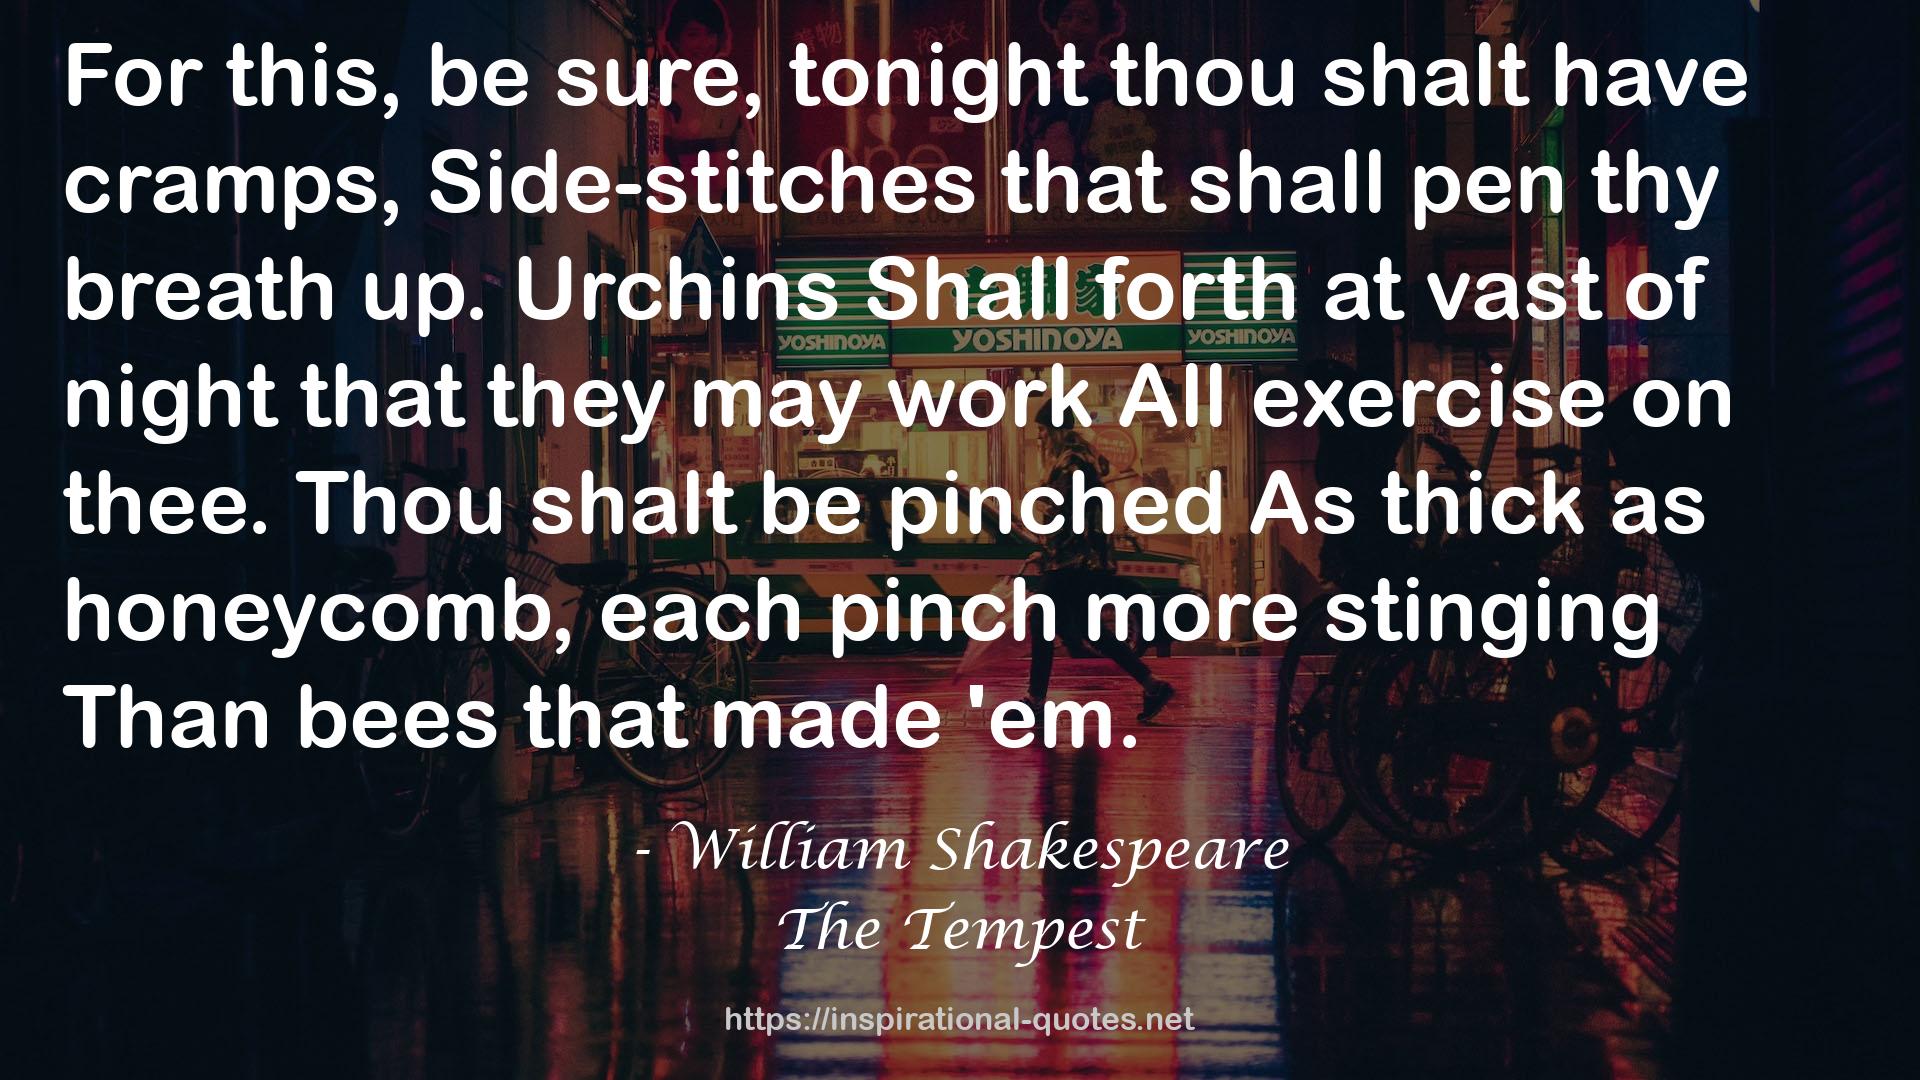 The Tempest QUOTES